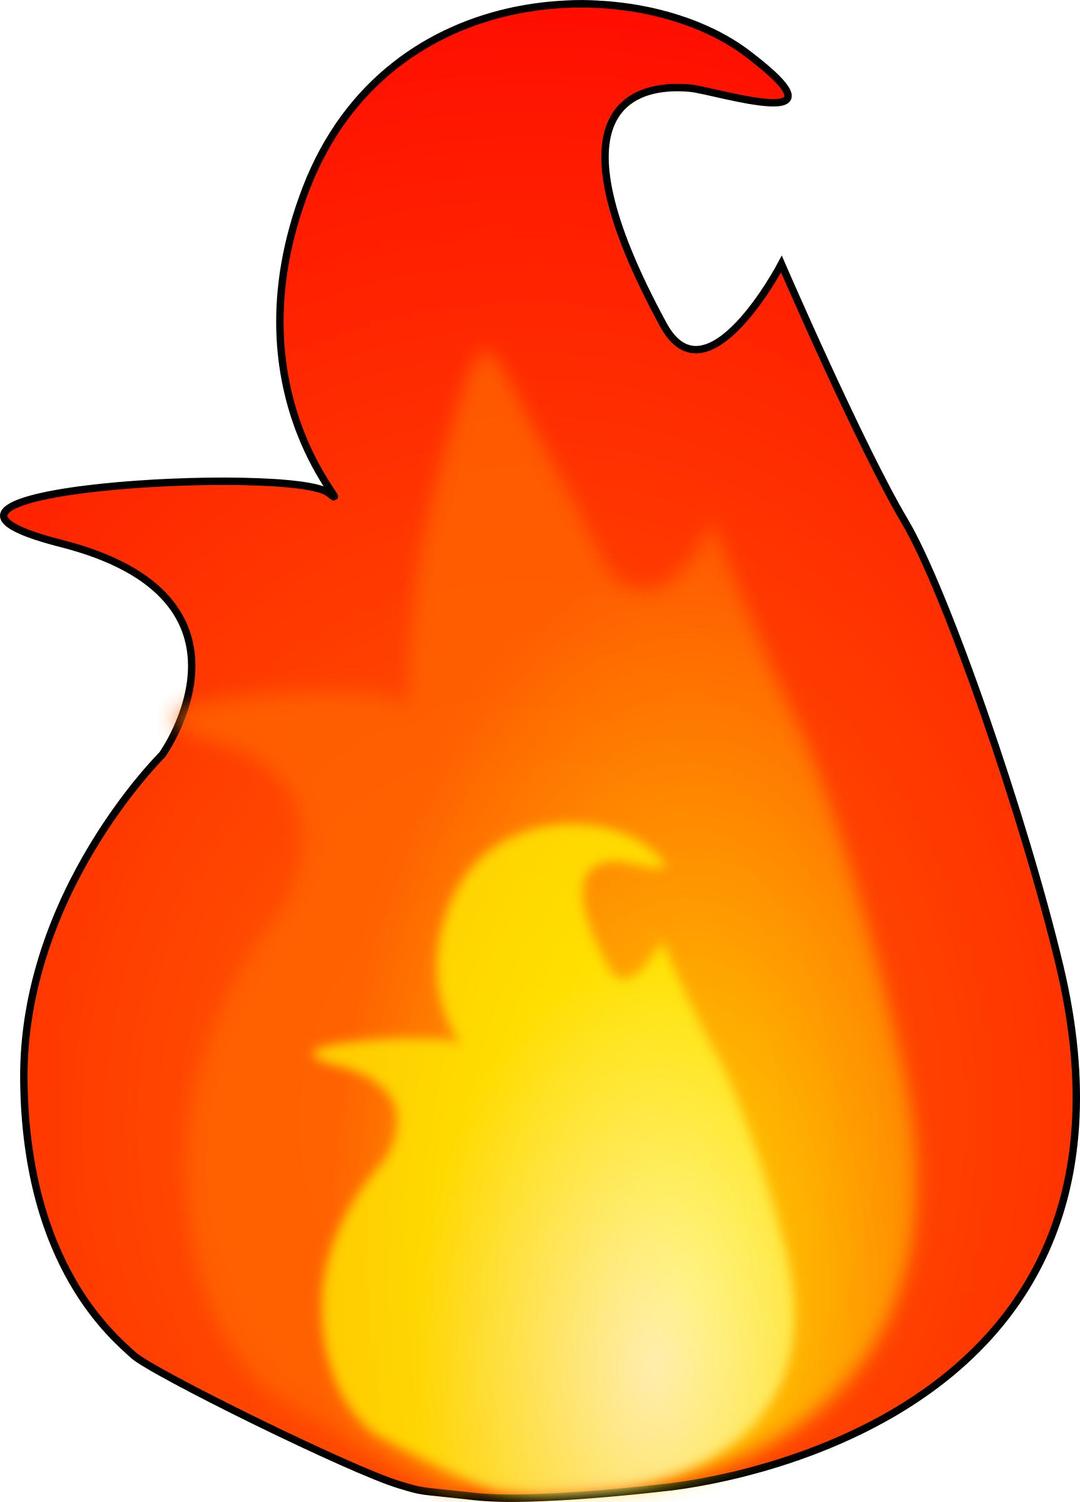 Another Fire Flame png transparent